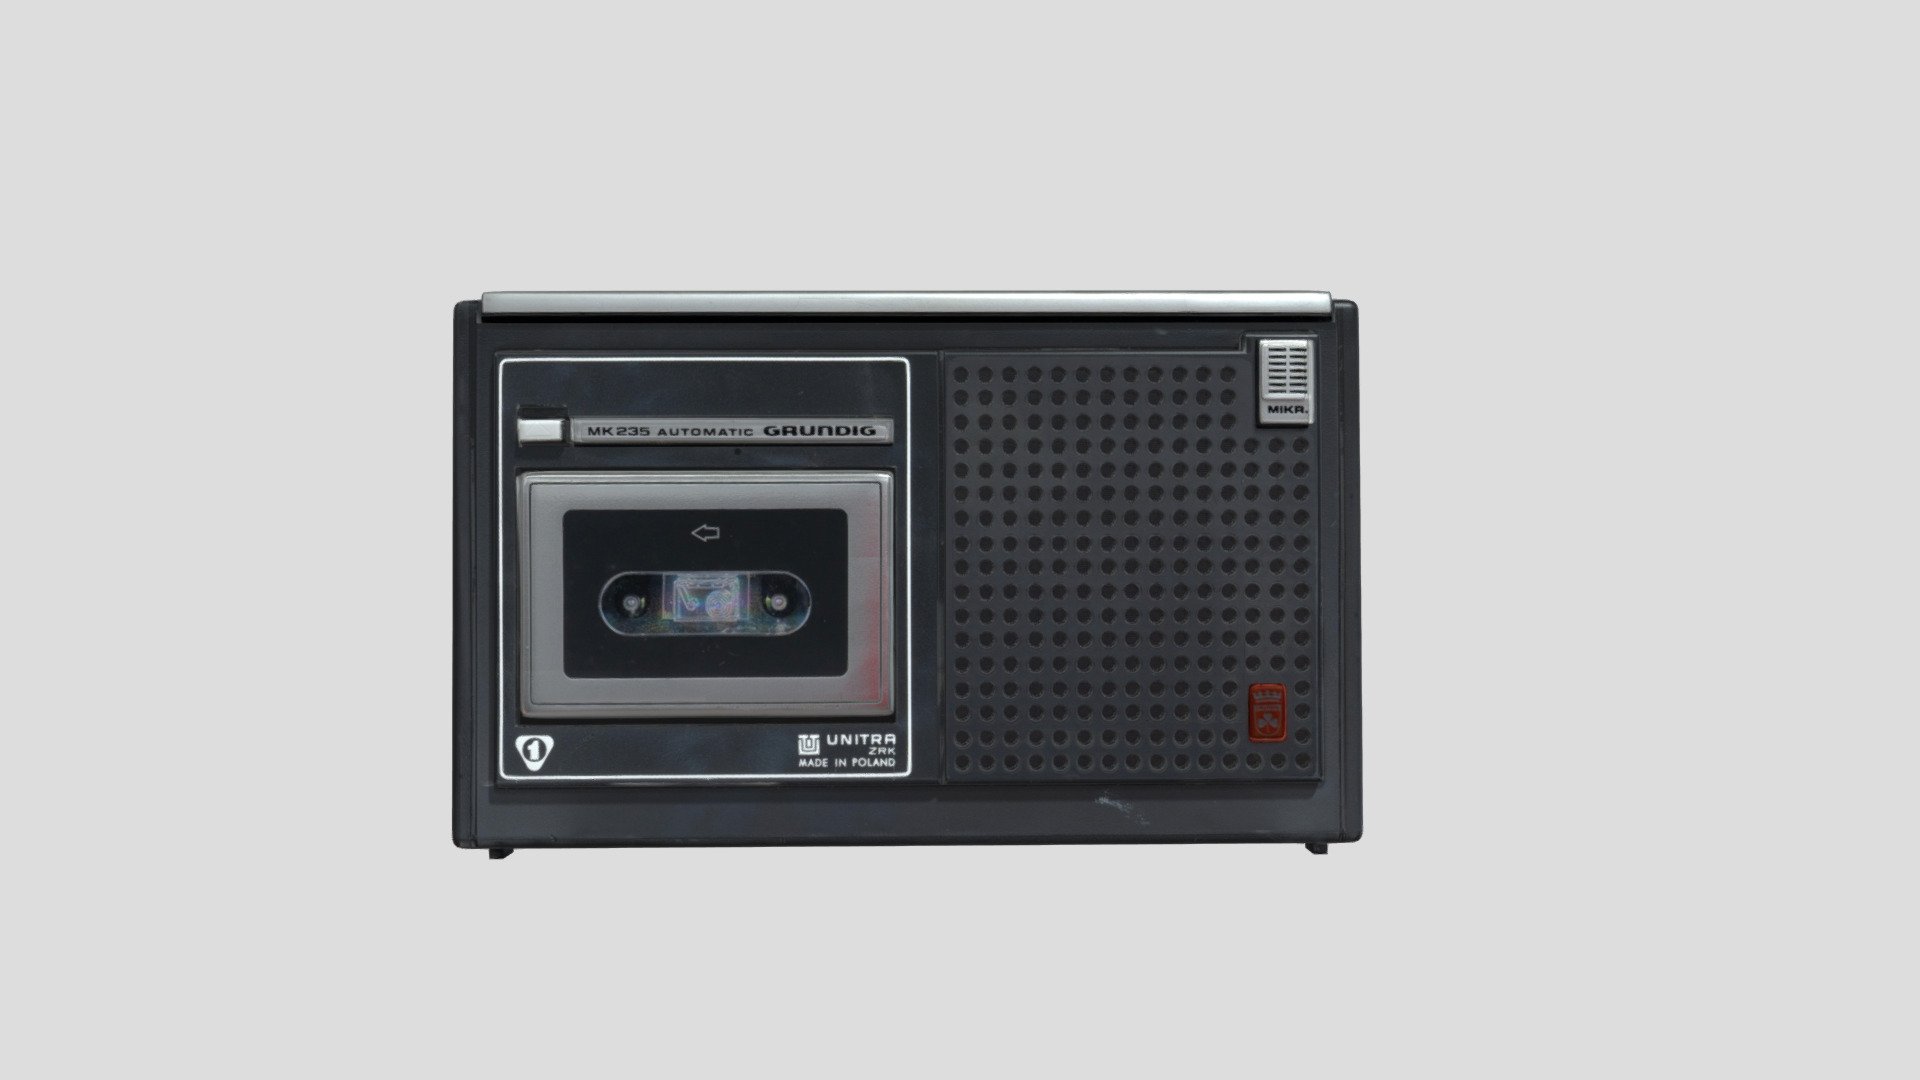 The MK 235 cassette recorder (sometimes referred to as “ZRK MK 235” or “MK 235 Automatic”) was manufactured in 1976-1978. The portable cassette recorder, positioned on the boundary of popular and standard product classes, was designed to record sound and play back recordings. Its design was based on the licensed C-235 model by Grundig. It incorporated transistors and an integrated circuit. The MK 235 is powered from an AC source or batteries (five R14 type batteries). Operation time using batteries is about 14 hours. The tape recorder is designed to play cassettes at a tape speed of 4.75 cm/s. The aesthetics of the device are minimalistic, dominated by the geometry of its overall shape. Its form is livened up by the rounding of its edges, using geometric shapes and grooves to divide the planes.

Manufacturer: Zakłady Radiowe im. Marcina Kasprzaka, 1978

Inv. No.: MIM 1317/V-295

Model prepared on the basis of photogrammetric measurements

Licence: CC BY-NC-SA - MK 235 cassette recorder - Download Free 3D model by Museum of Engineering and Technology, Krakow (@mitkrakow) 3d model